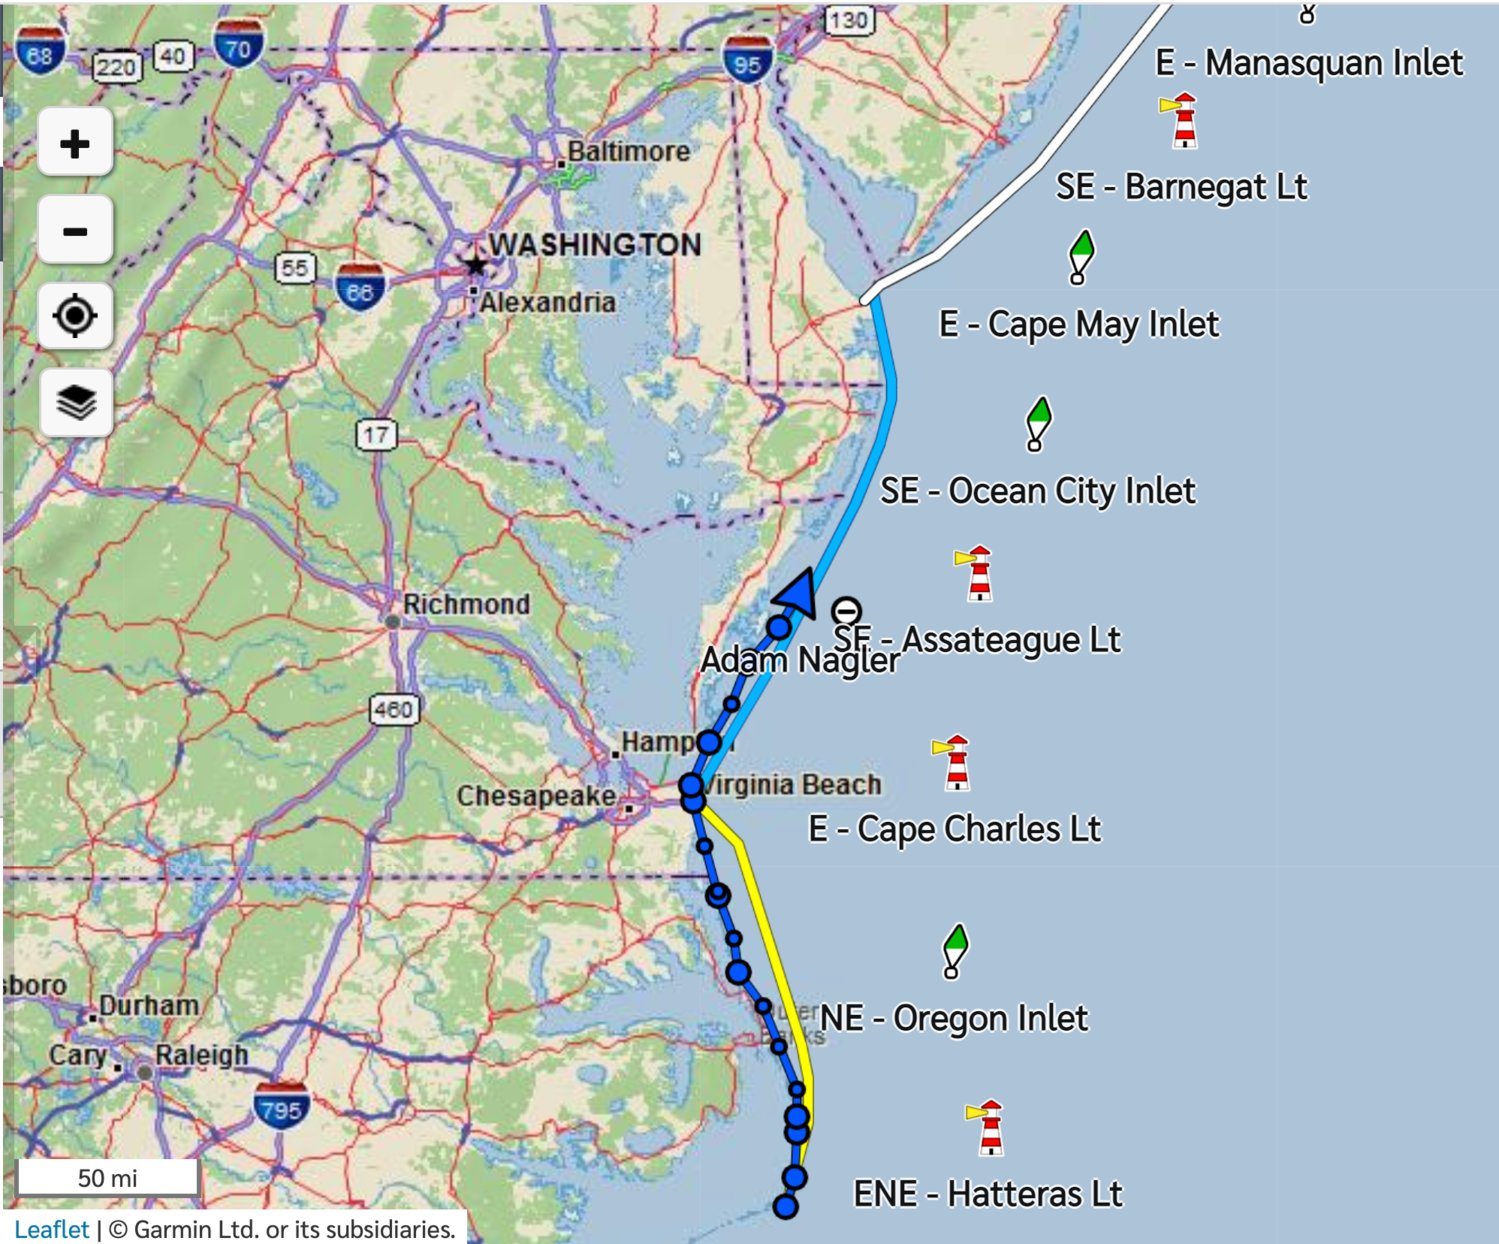 Adam Nagler is midway through the second leg of his four-leg journey. His next resupply stop is Cape Henlopen, Delaware (start of the white line).